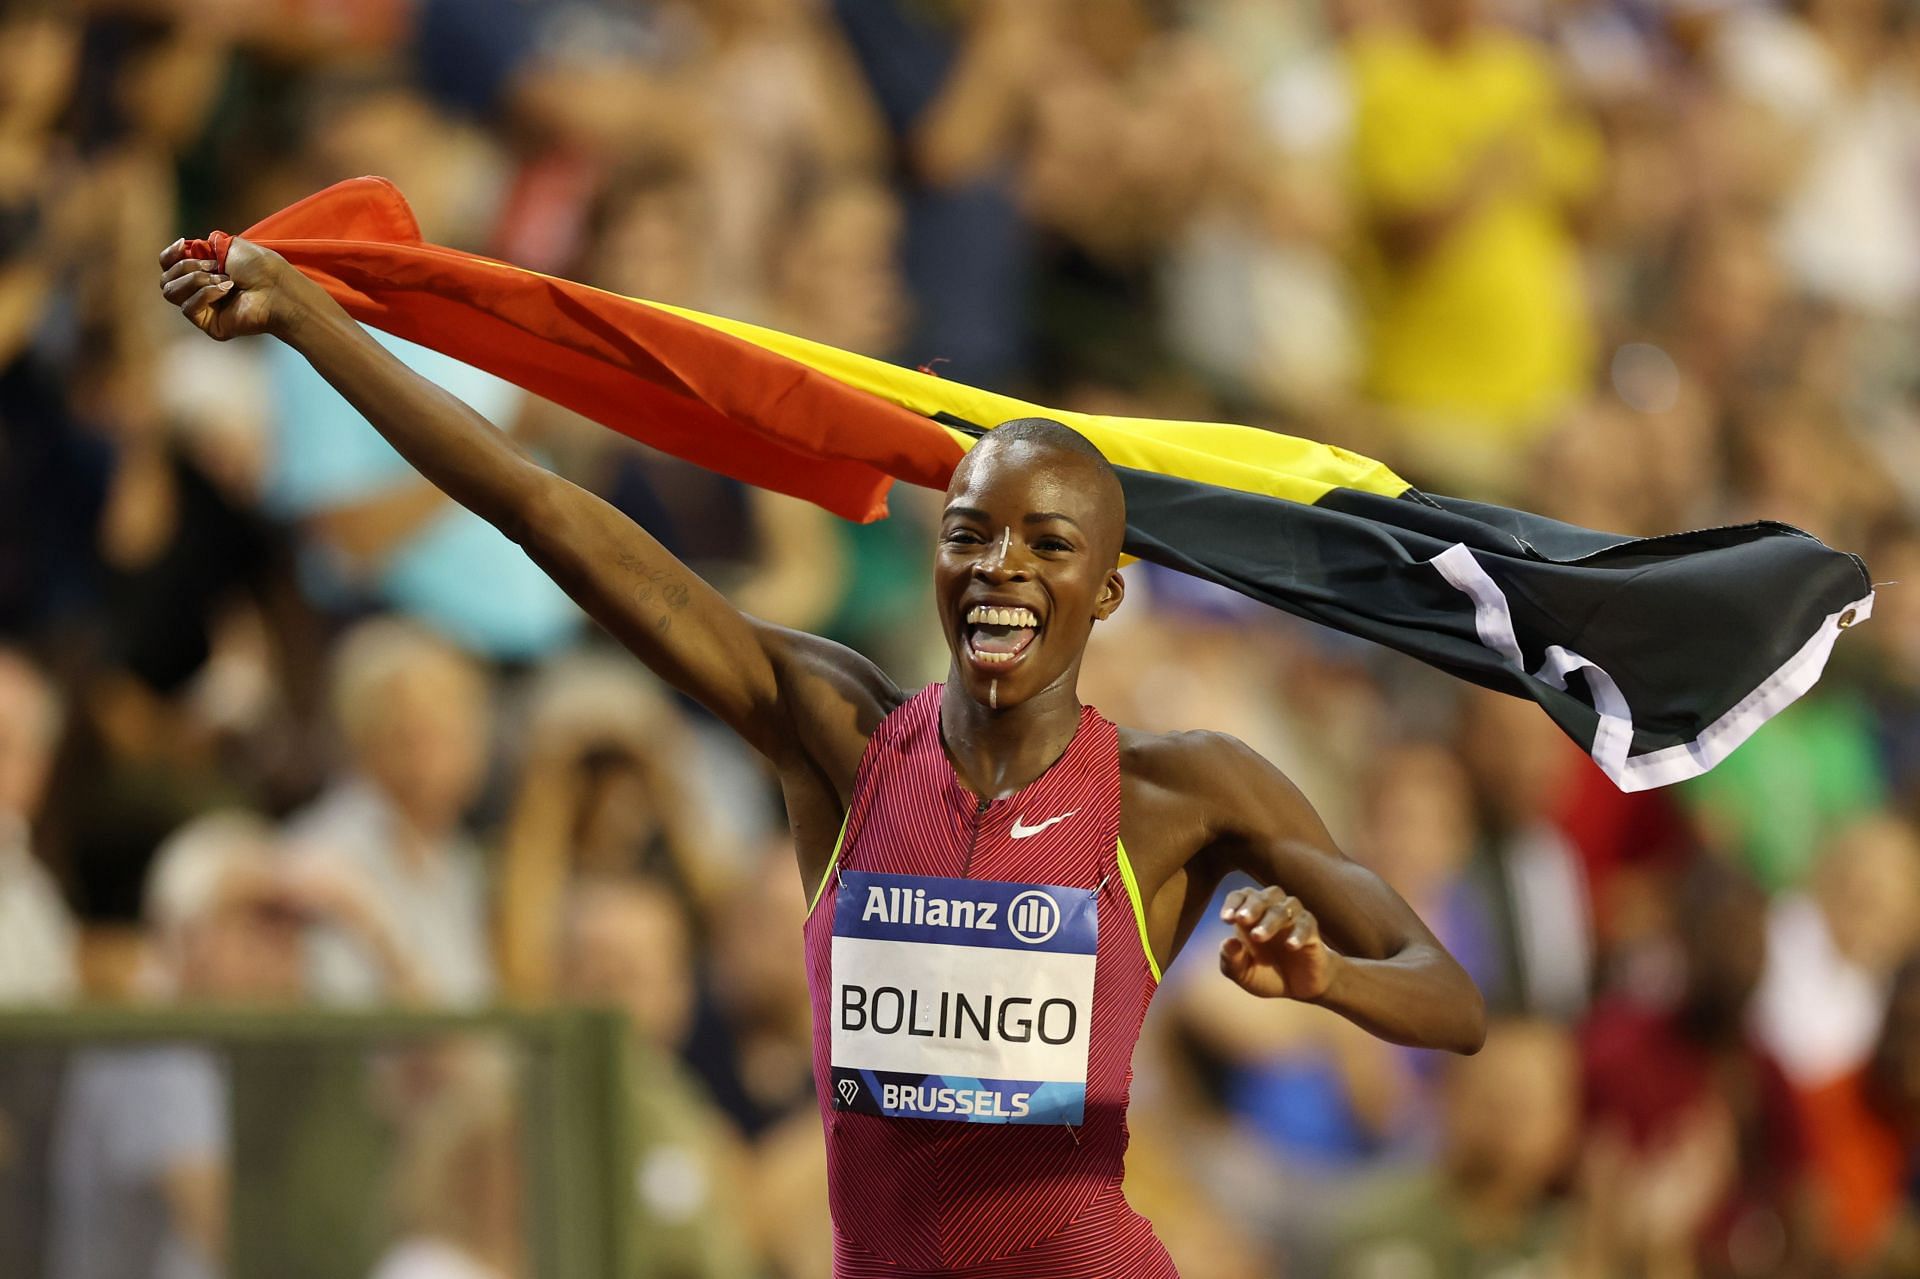 Cynthia Bolingo celebrates after winning a bronze medal in the women&#039;s 400m at the Allianz Memorial Van Damme, 2022 Diamond League Series in Brussels, Belgium